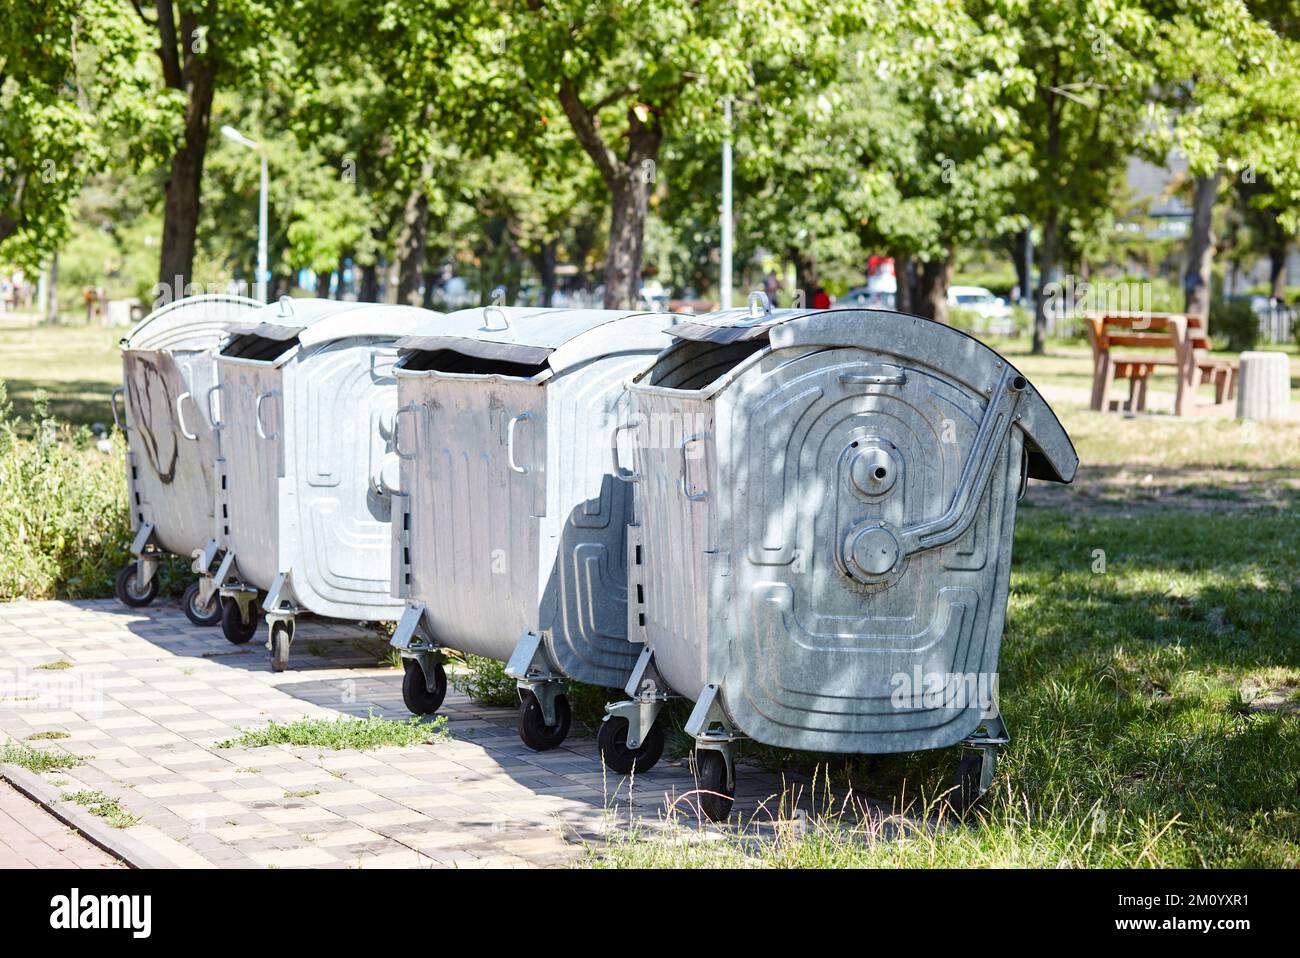 Garbage cans in the city park. Garbage container in a public park. Environment, city life, sanitary standards Stock Photo